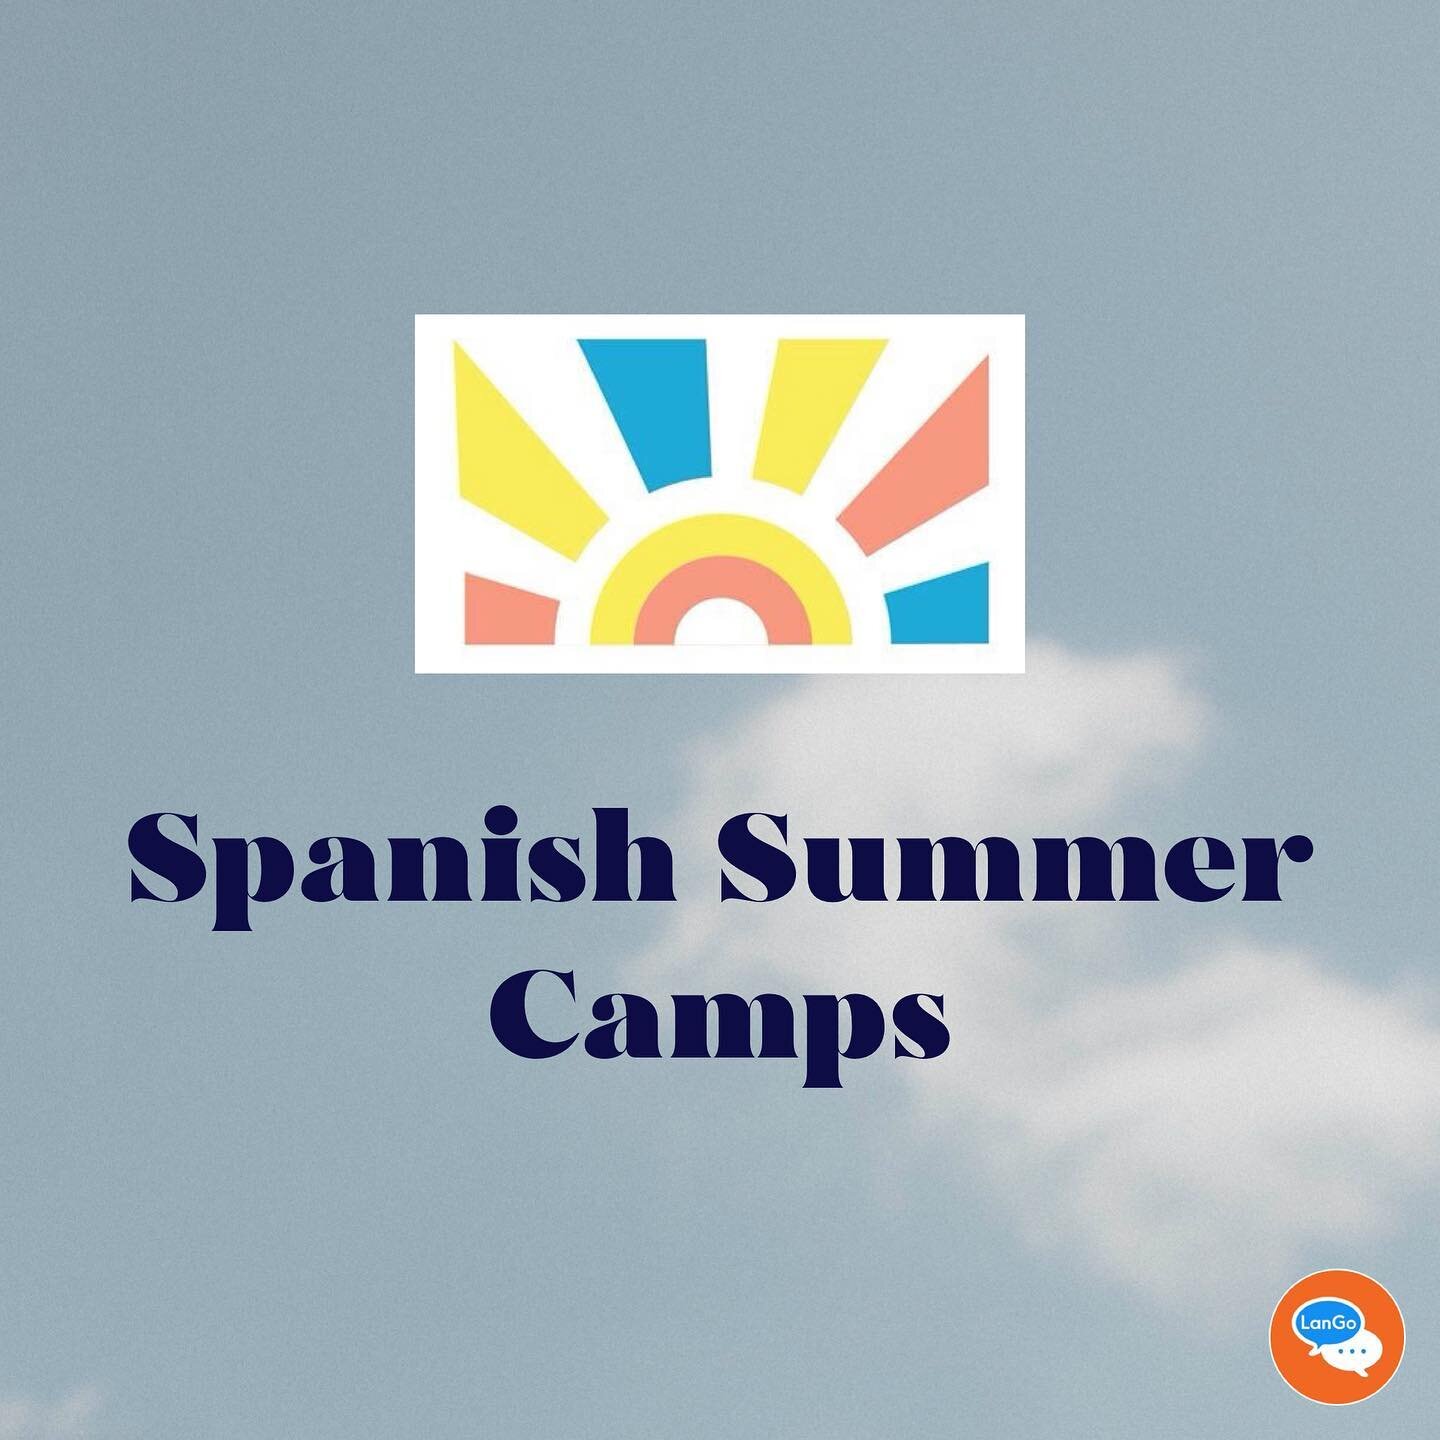 &iexcl;Hola LanGorinos! This summer we are offering 2 weeks of Spanish youth camps. The first week is for Lil LanGoroos ages 2 - 5, the second week is for teens and pre-teens. Contact us to register the kiddos in your life for a summer of Spanish! &i